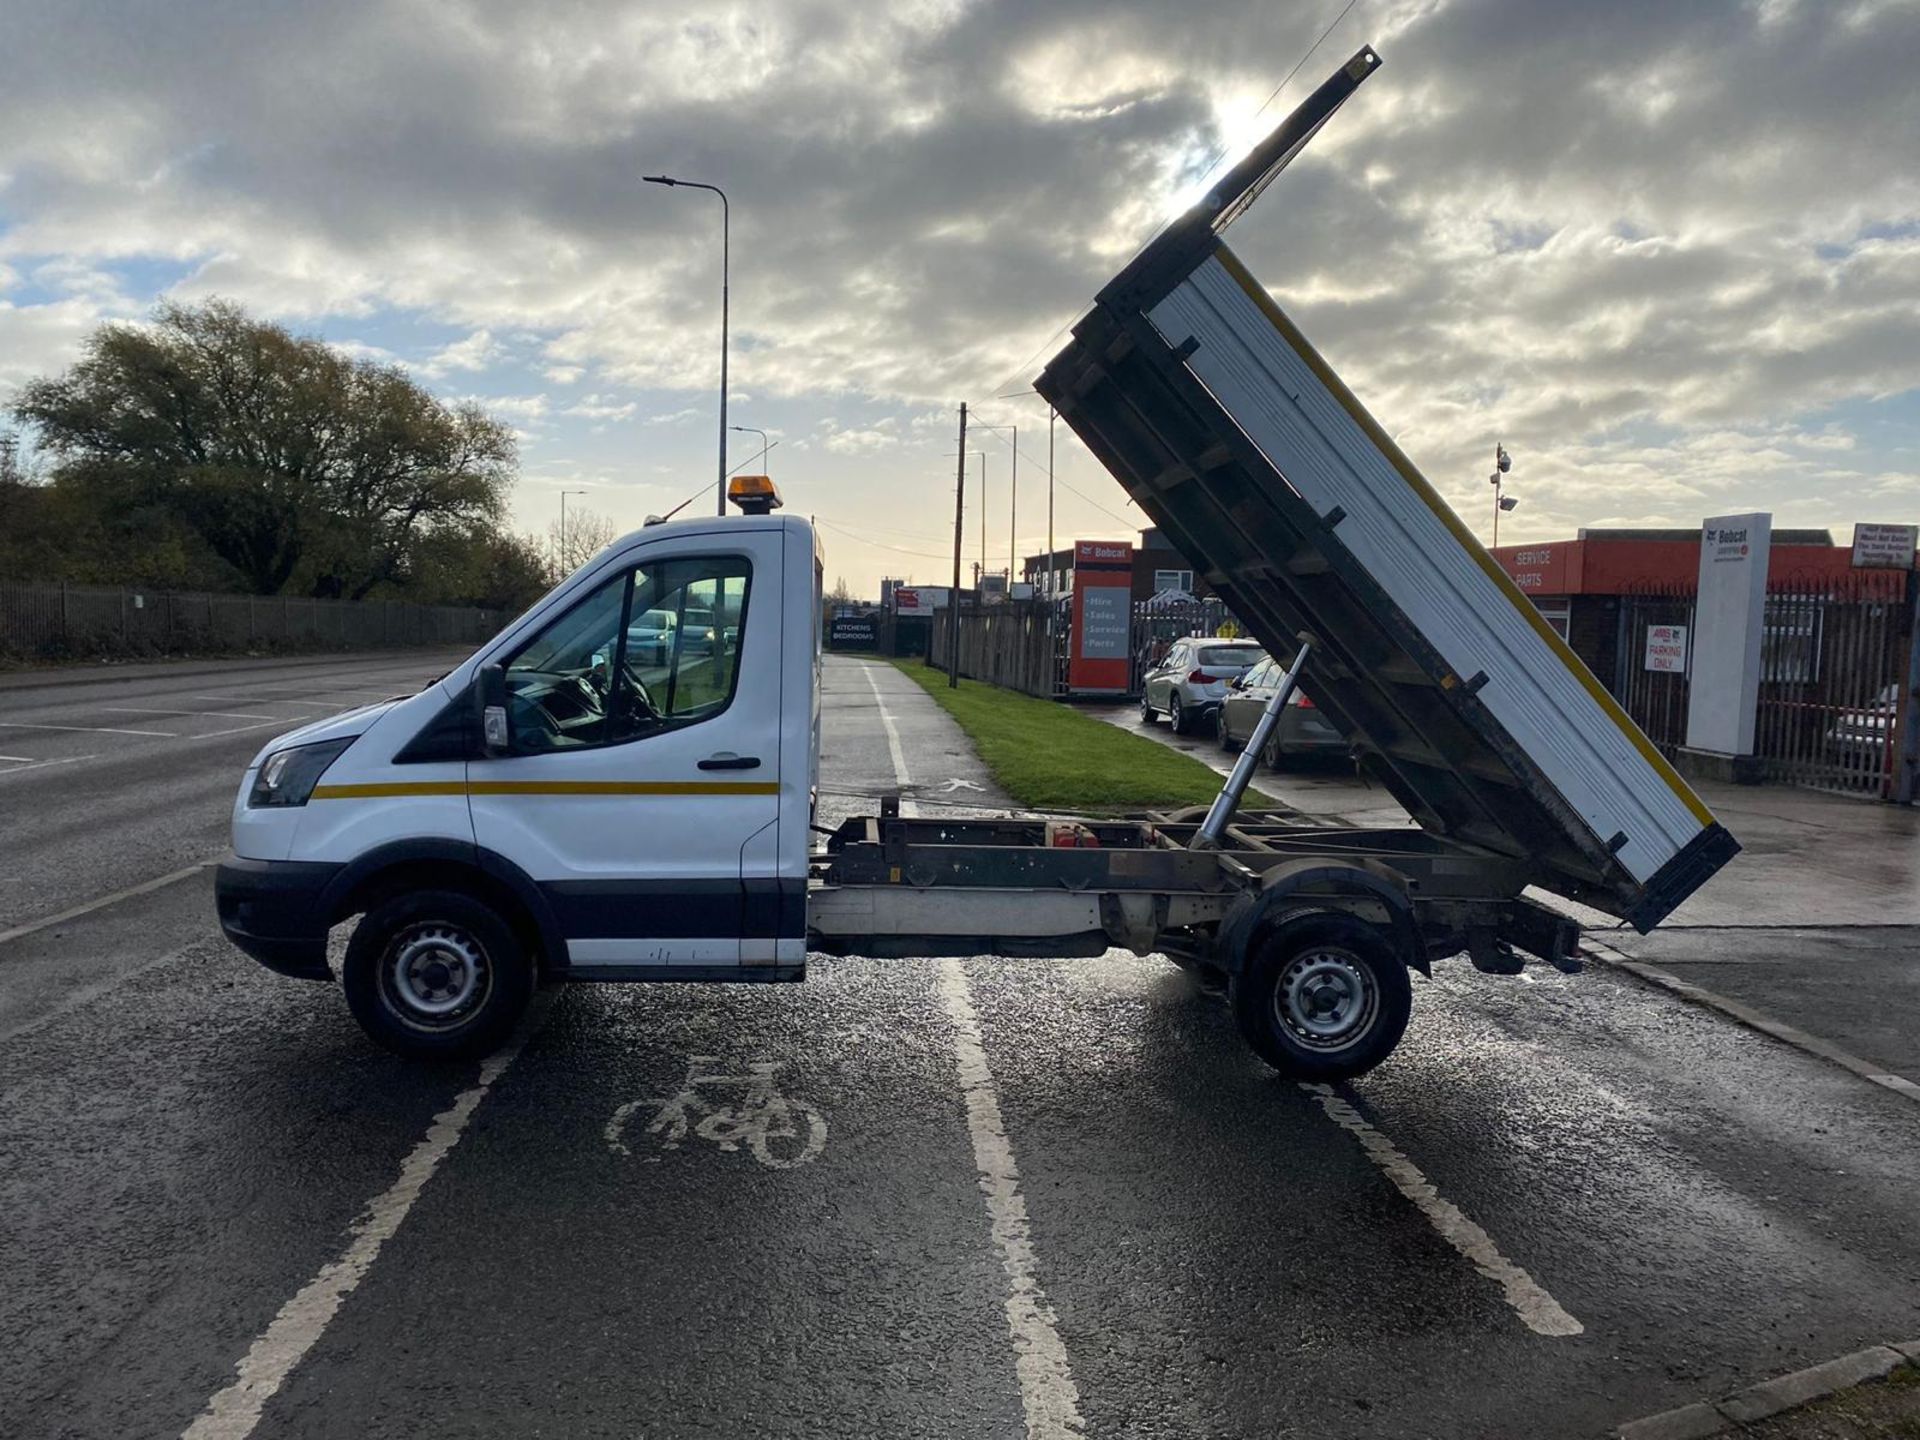 2019 19 FORD TRANSIT TIPPER - 83K MILES - FACTORY TIPPER - EURO 6. - Image 4 of 10